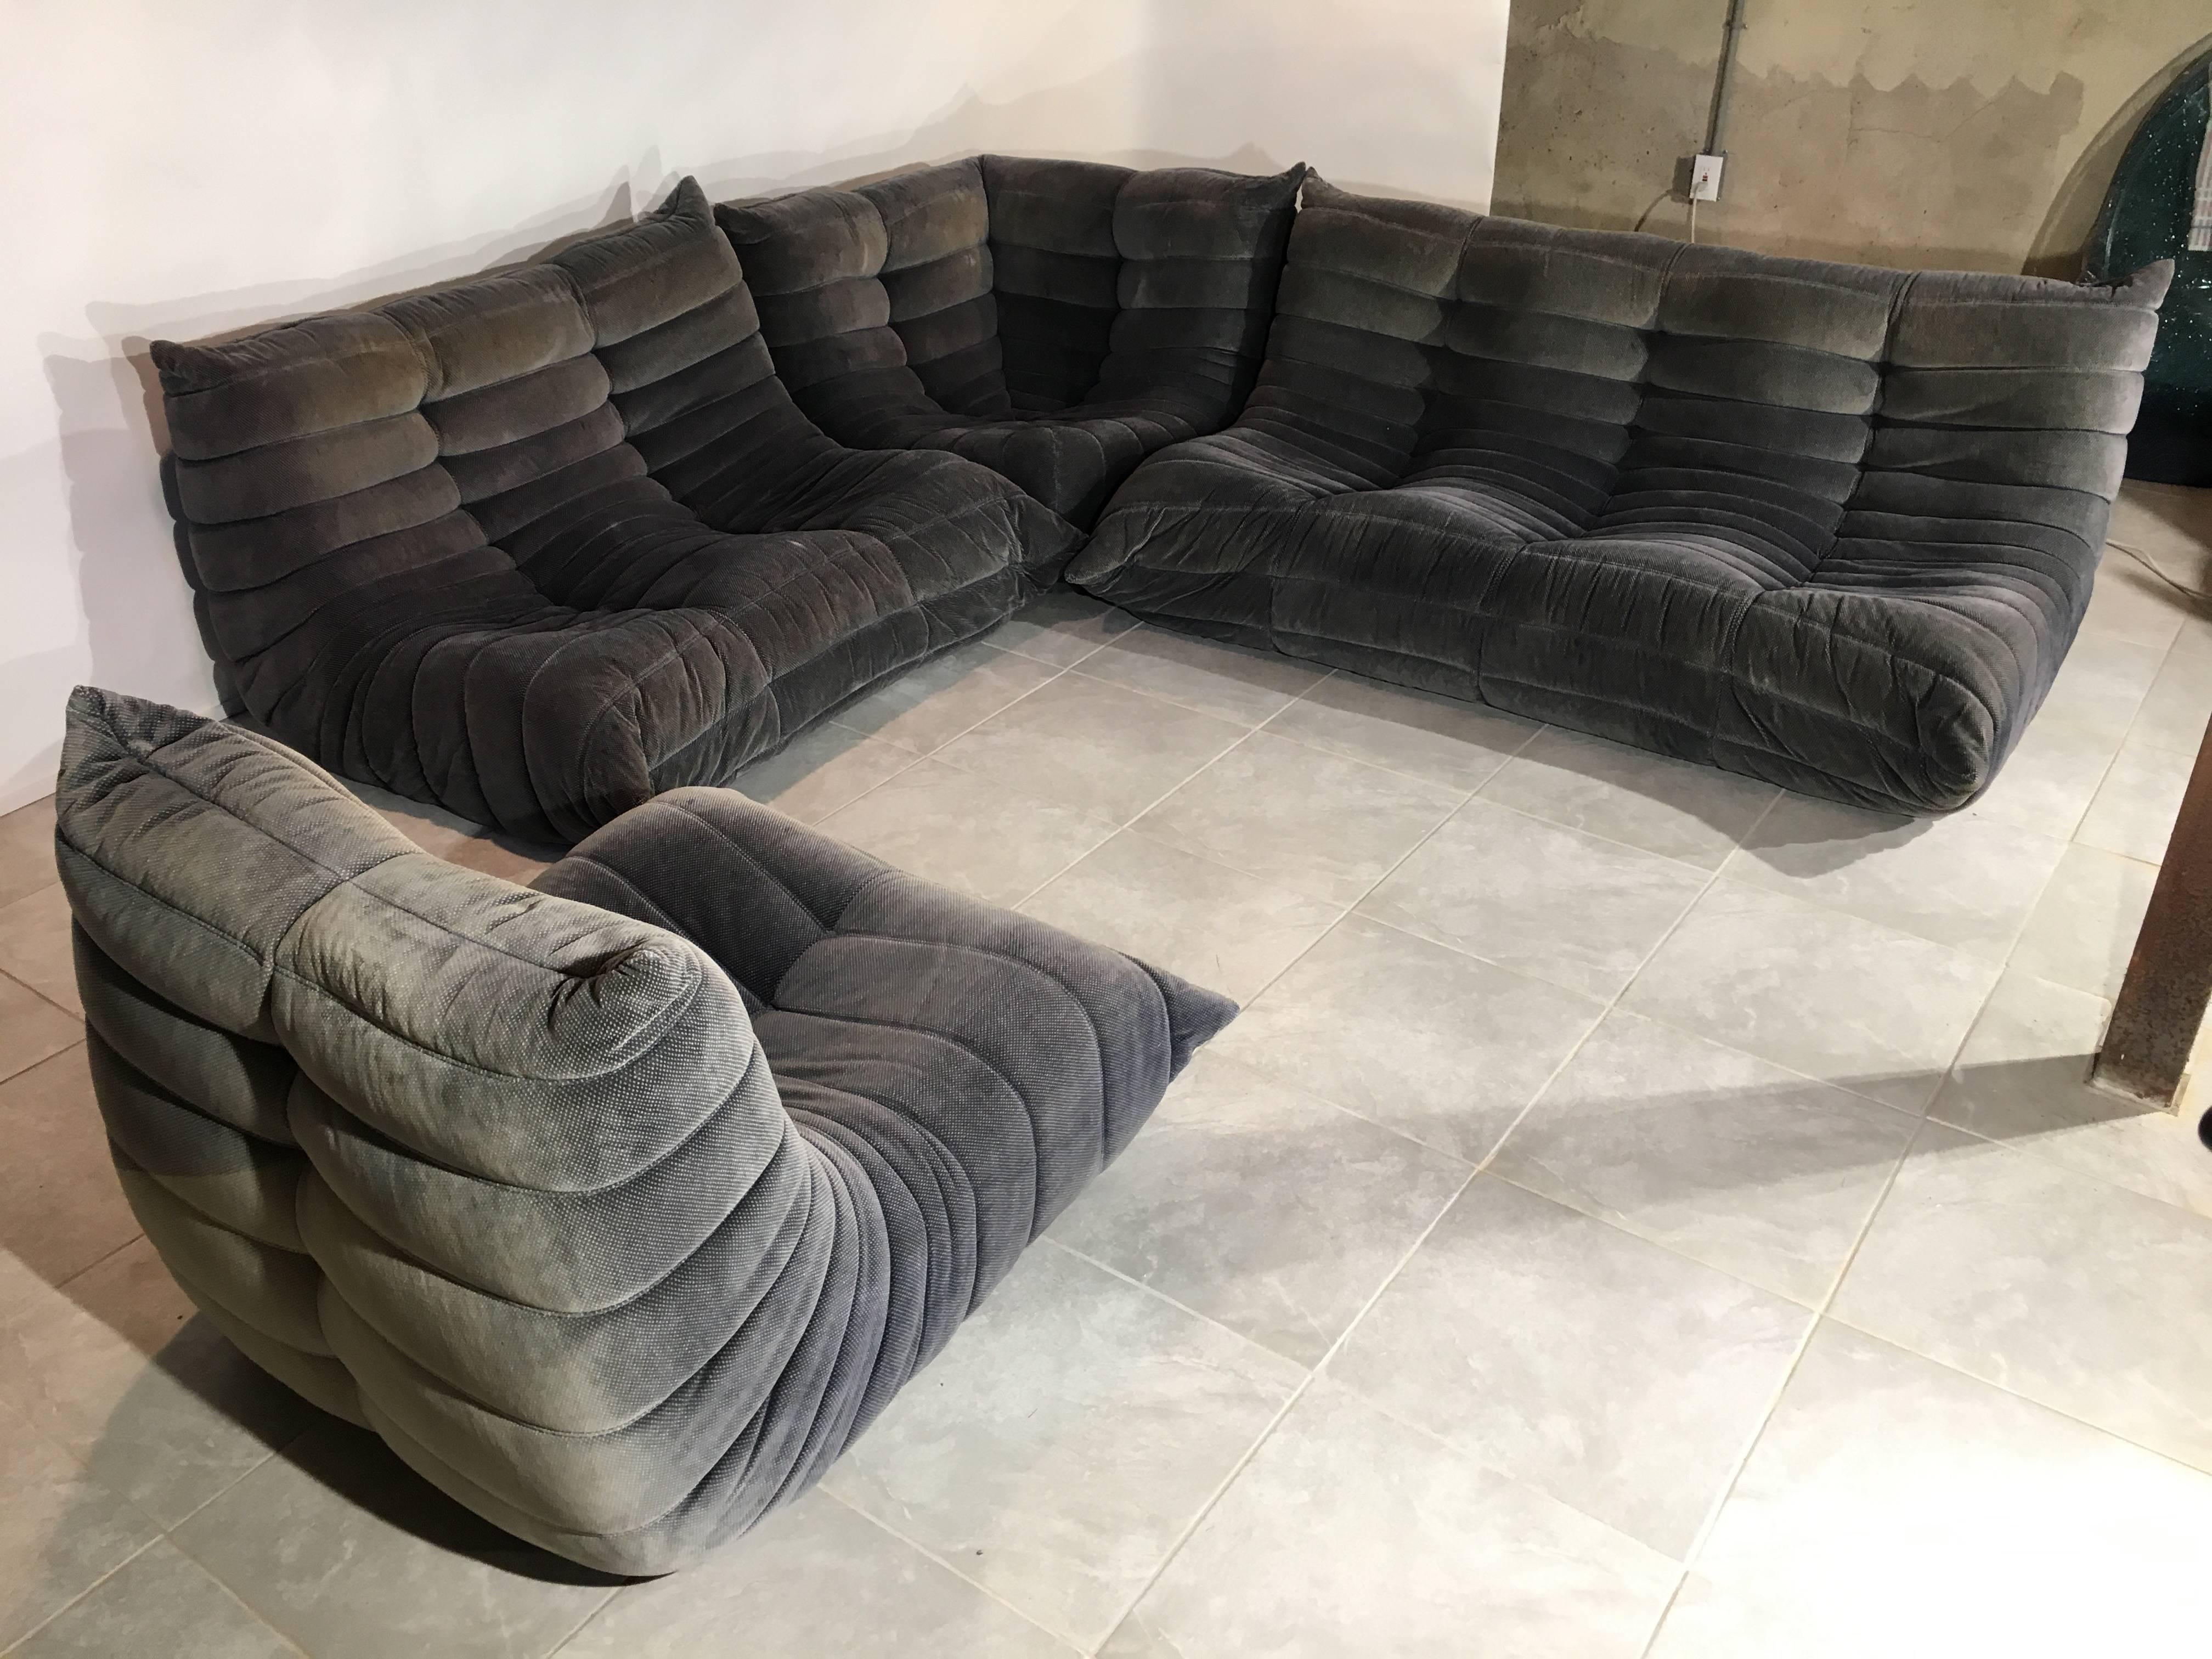 Michel Ducaroy and Lignet Roset legally licensed production of the famous Togo line to a company from Quebec, Canada by the name Ameublements Belus for a limited production two year run for North America. This is one of those sets.
Included are One